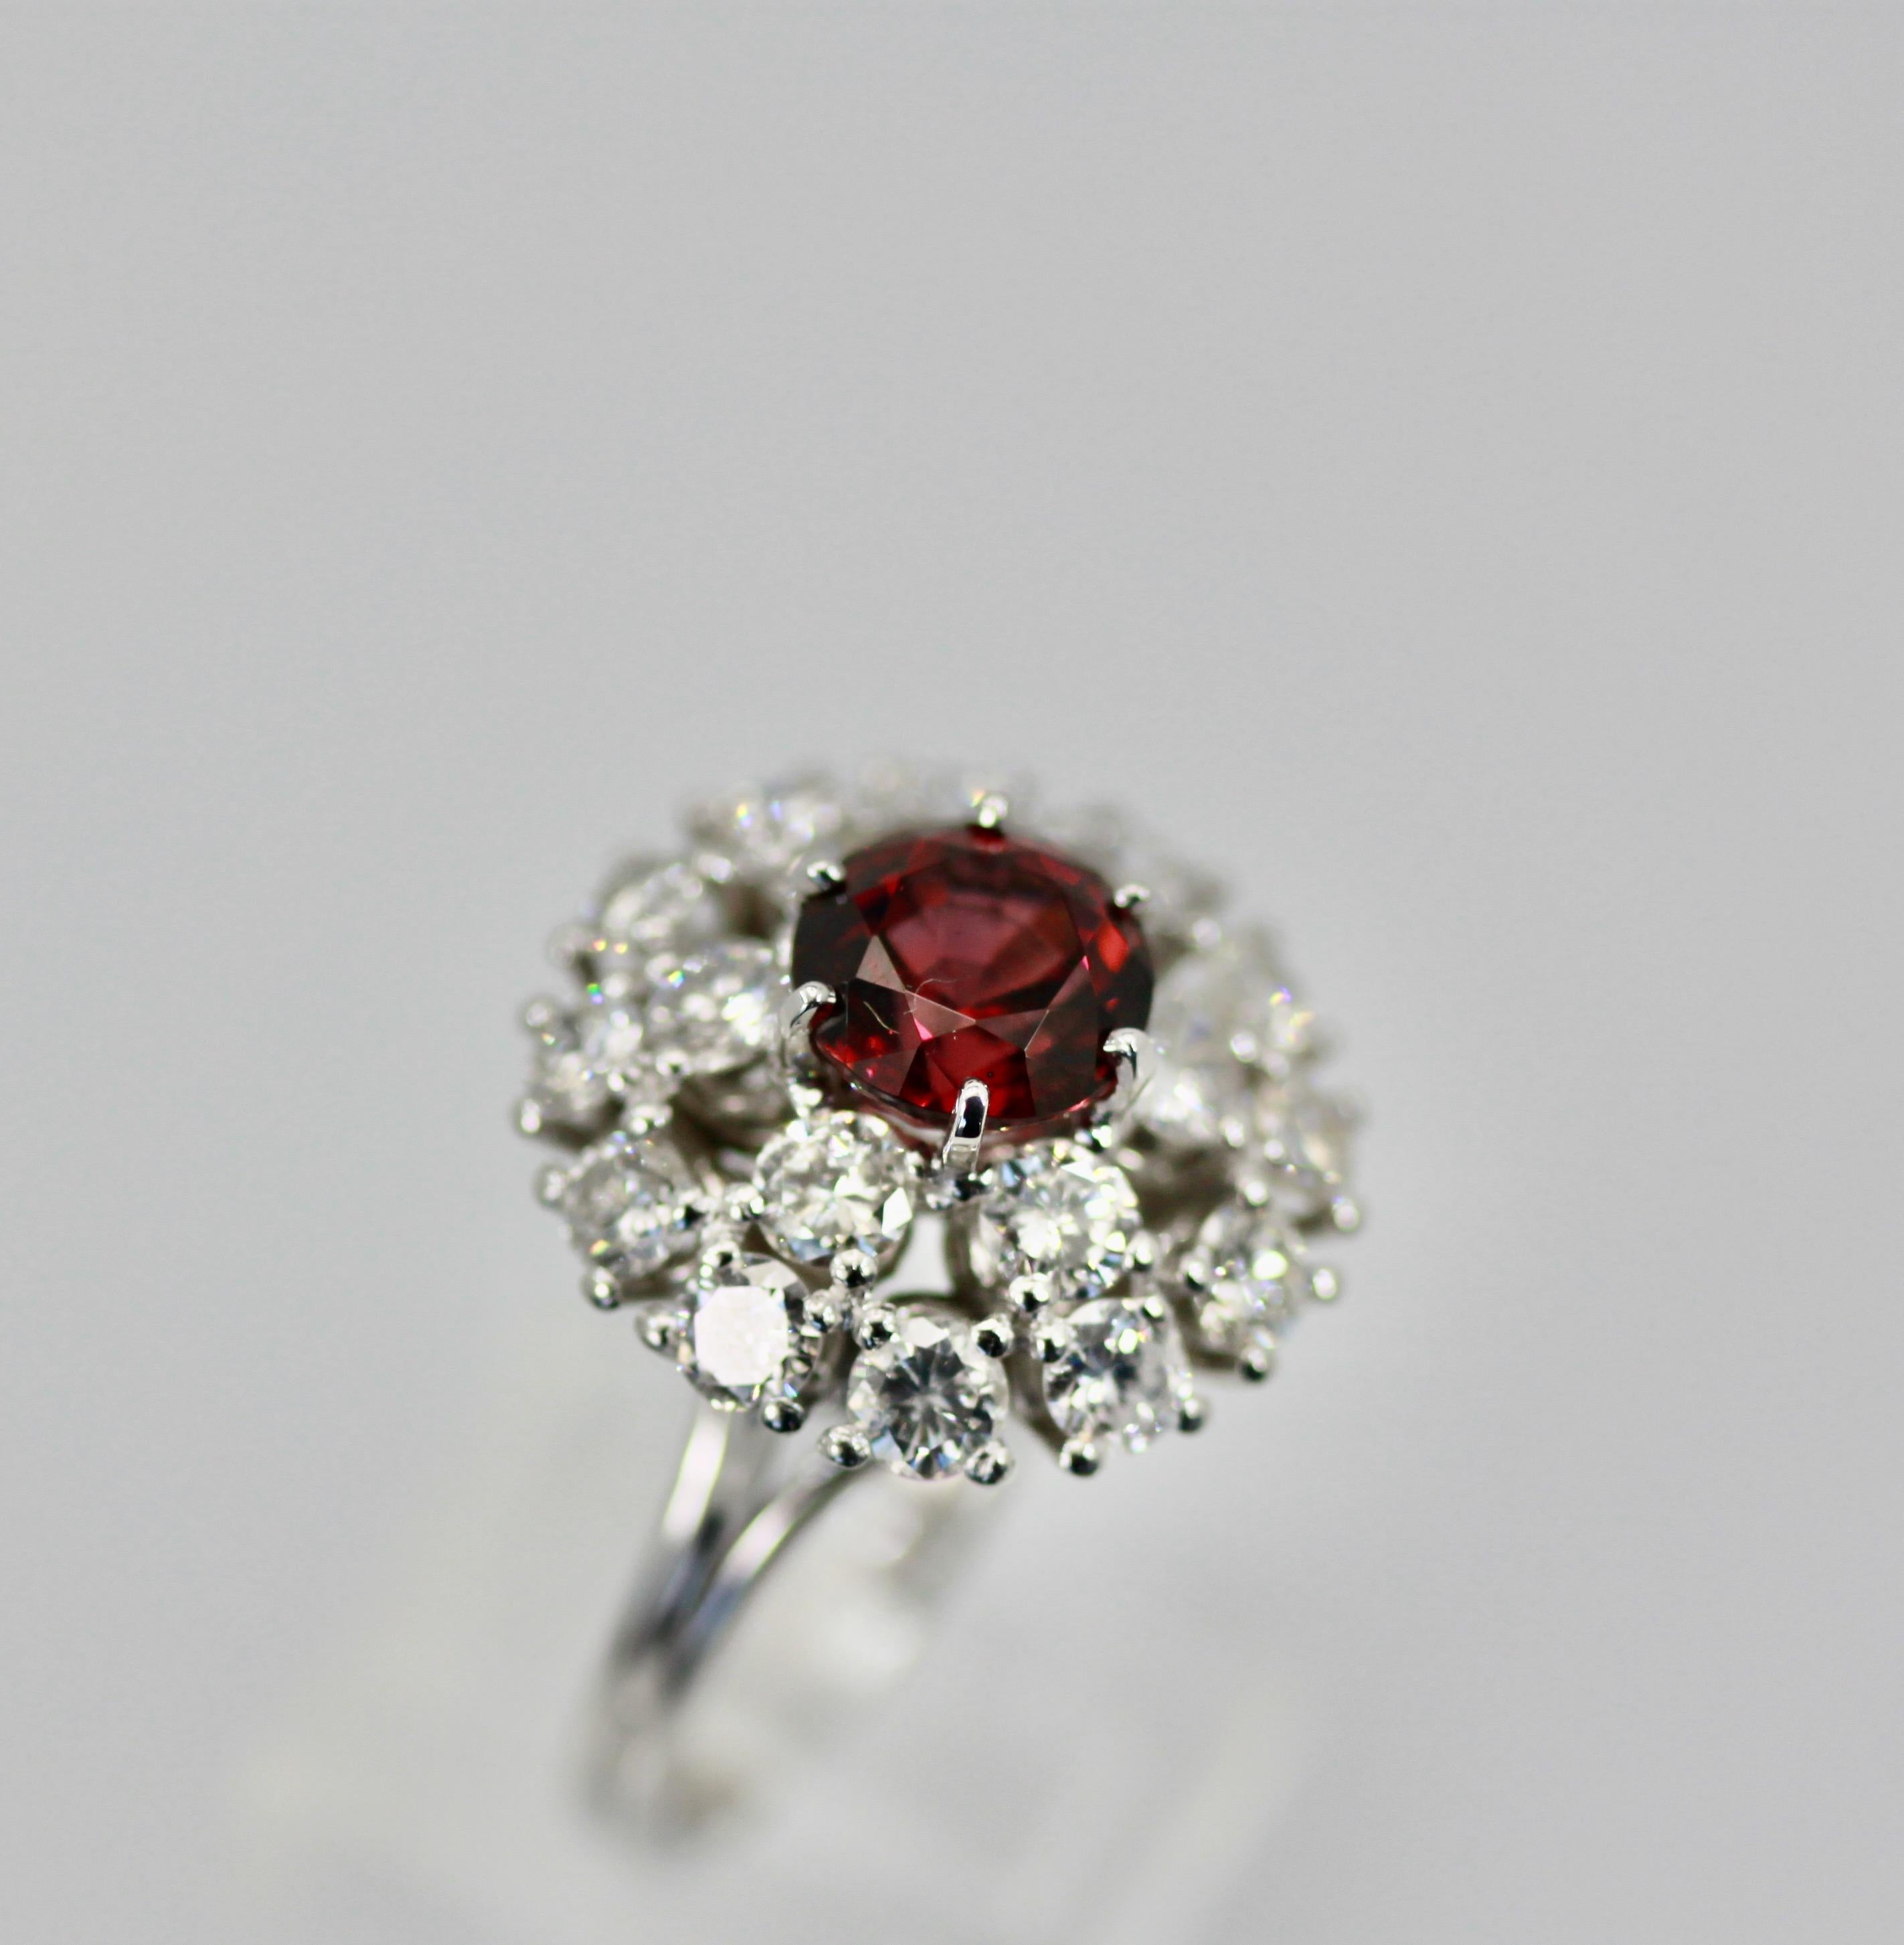 This natural Garnet Rhodolite Diamond surround Cocktail ring weights in at 3.66 carats and has no treatment whatsoever.  The Diamonds that surround this ring are over 3.00 carats in a target/ballerina style ring.  The Diamonds are G-H VS2- SI very